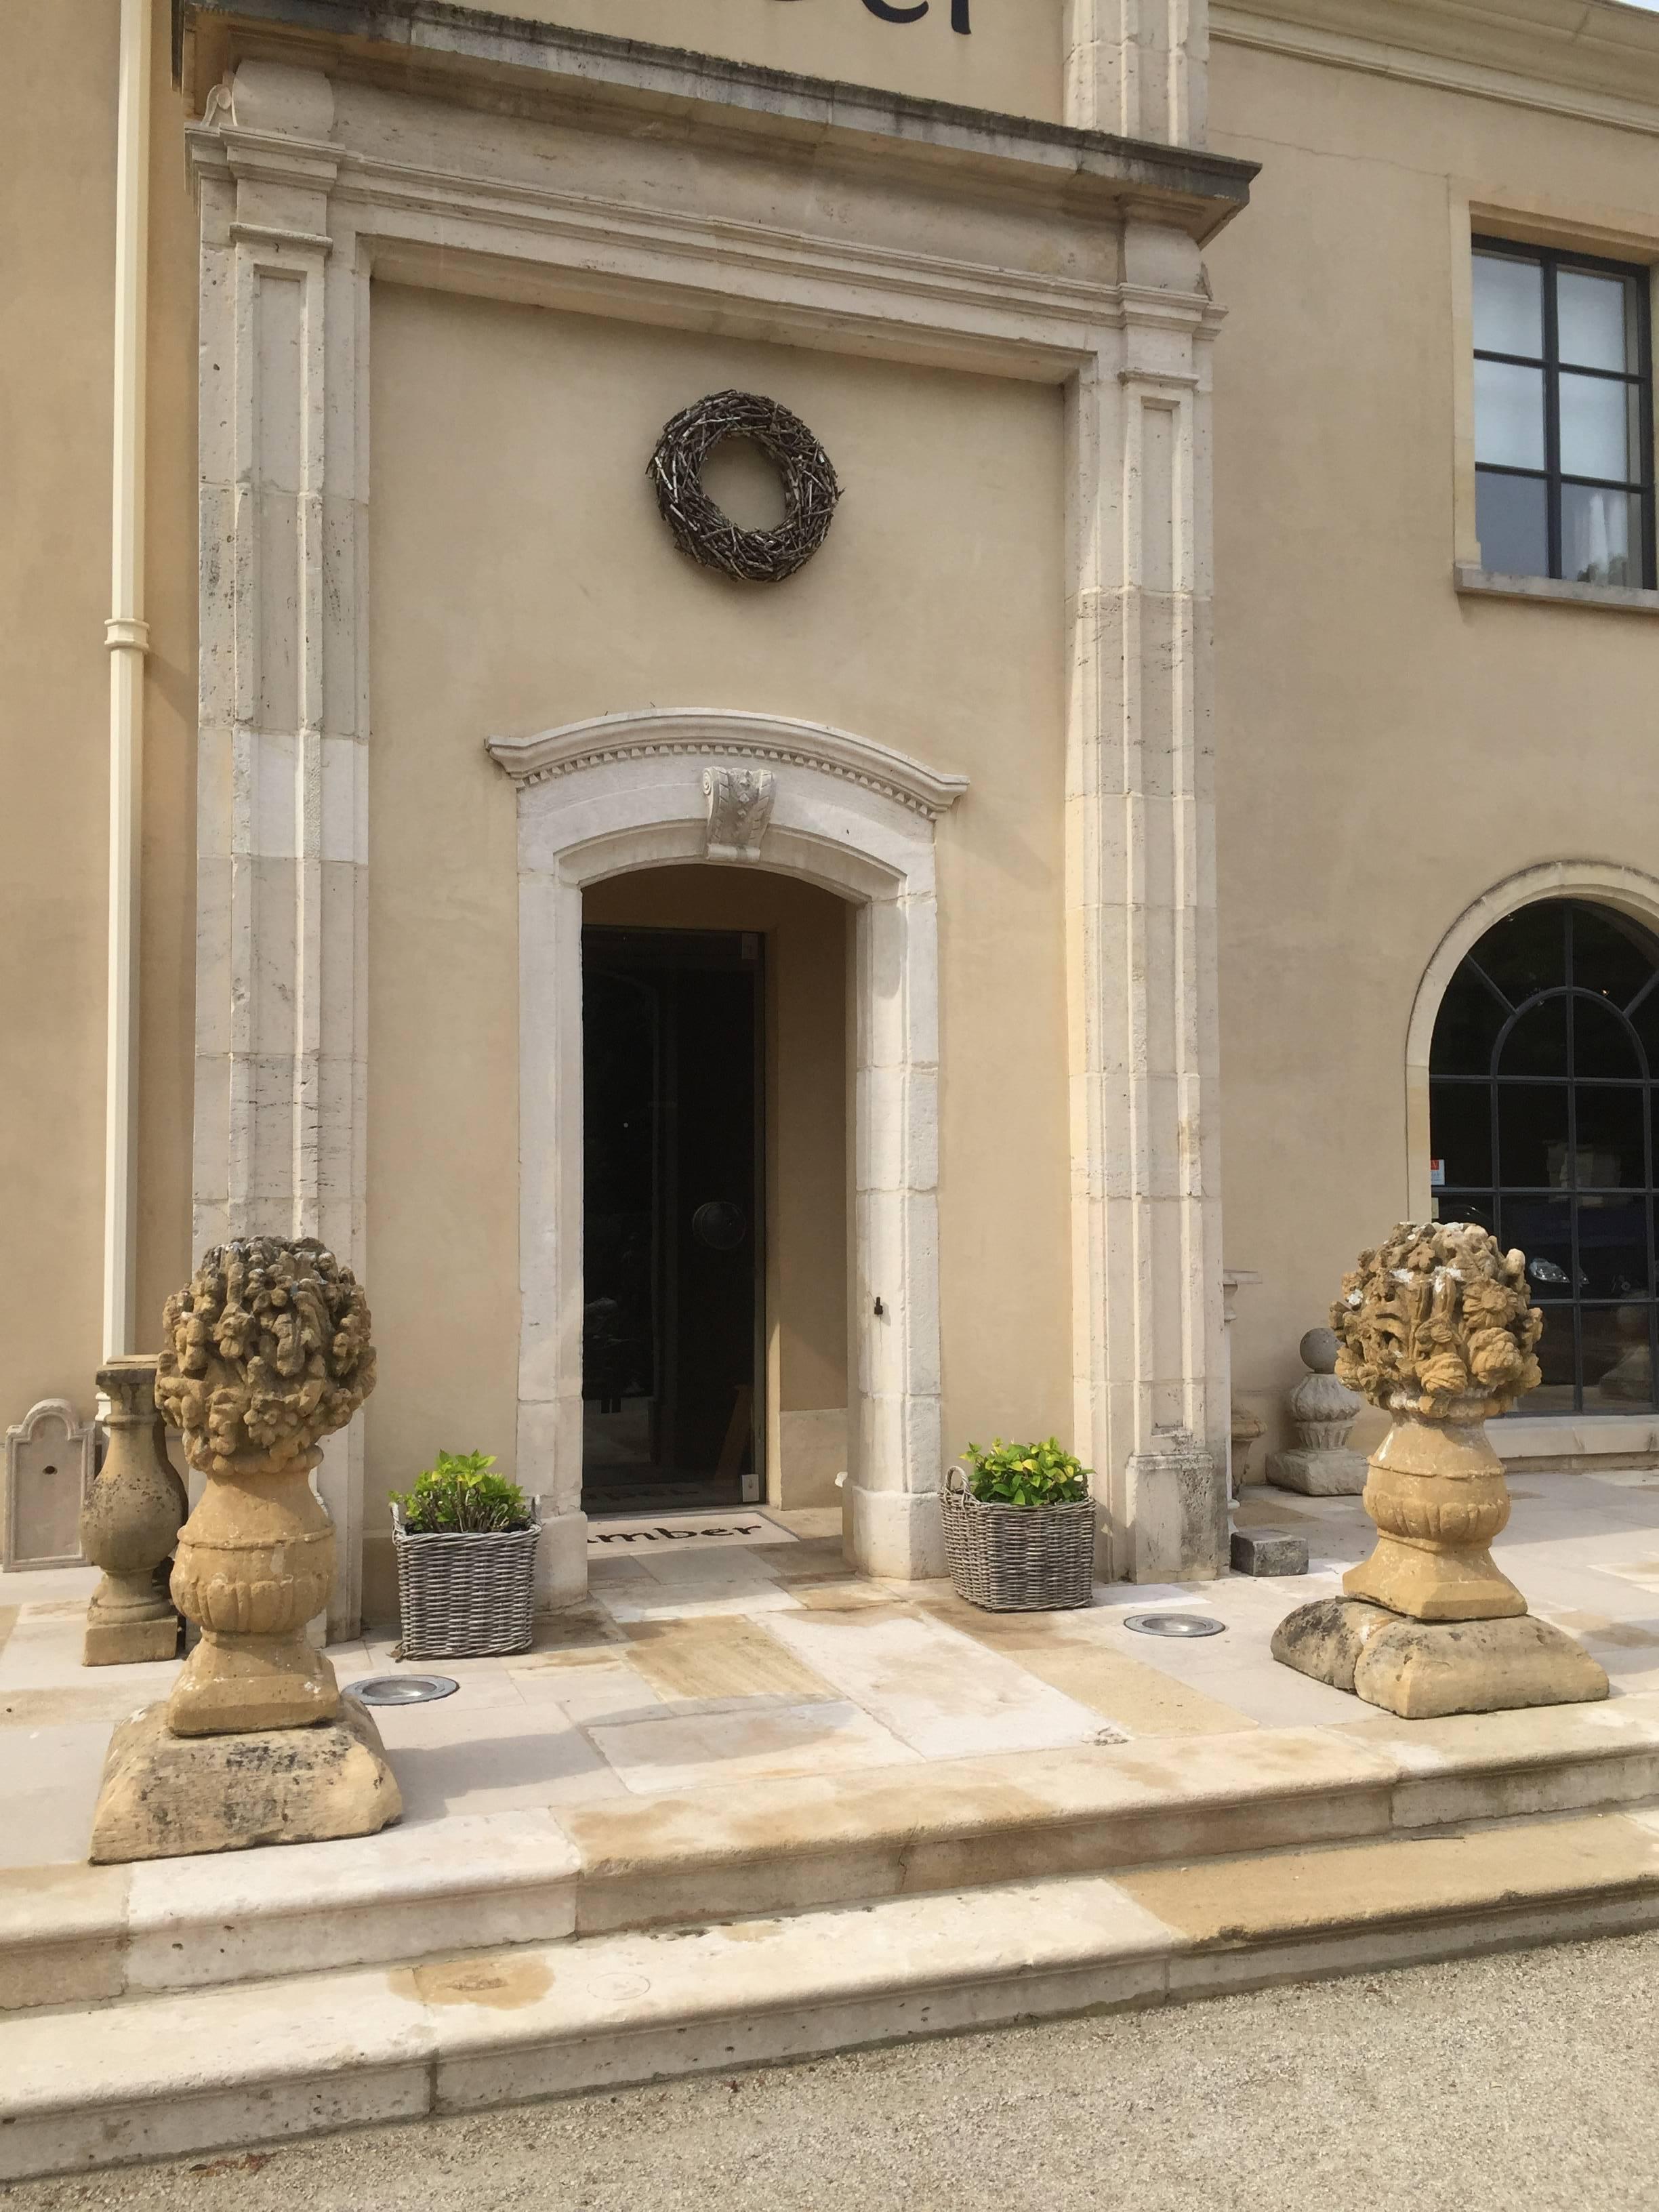 These so called 'Boucquets' were hand-carved in the late 17th century by French craftsmen. As the Baroque style found its French translation with Louis XIV architects and designers didn't stop at the castle gates. They also aspired to control nature